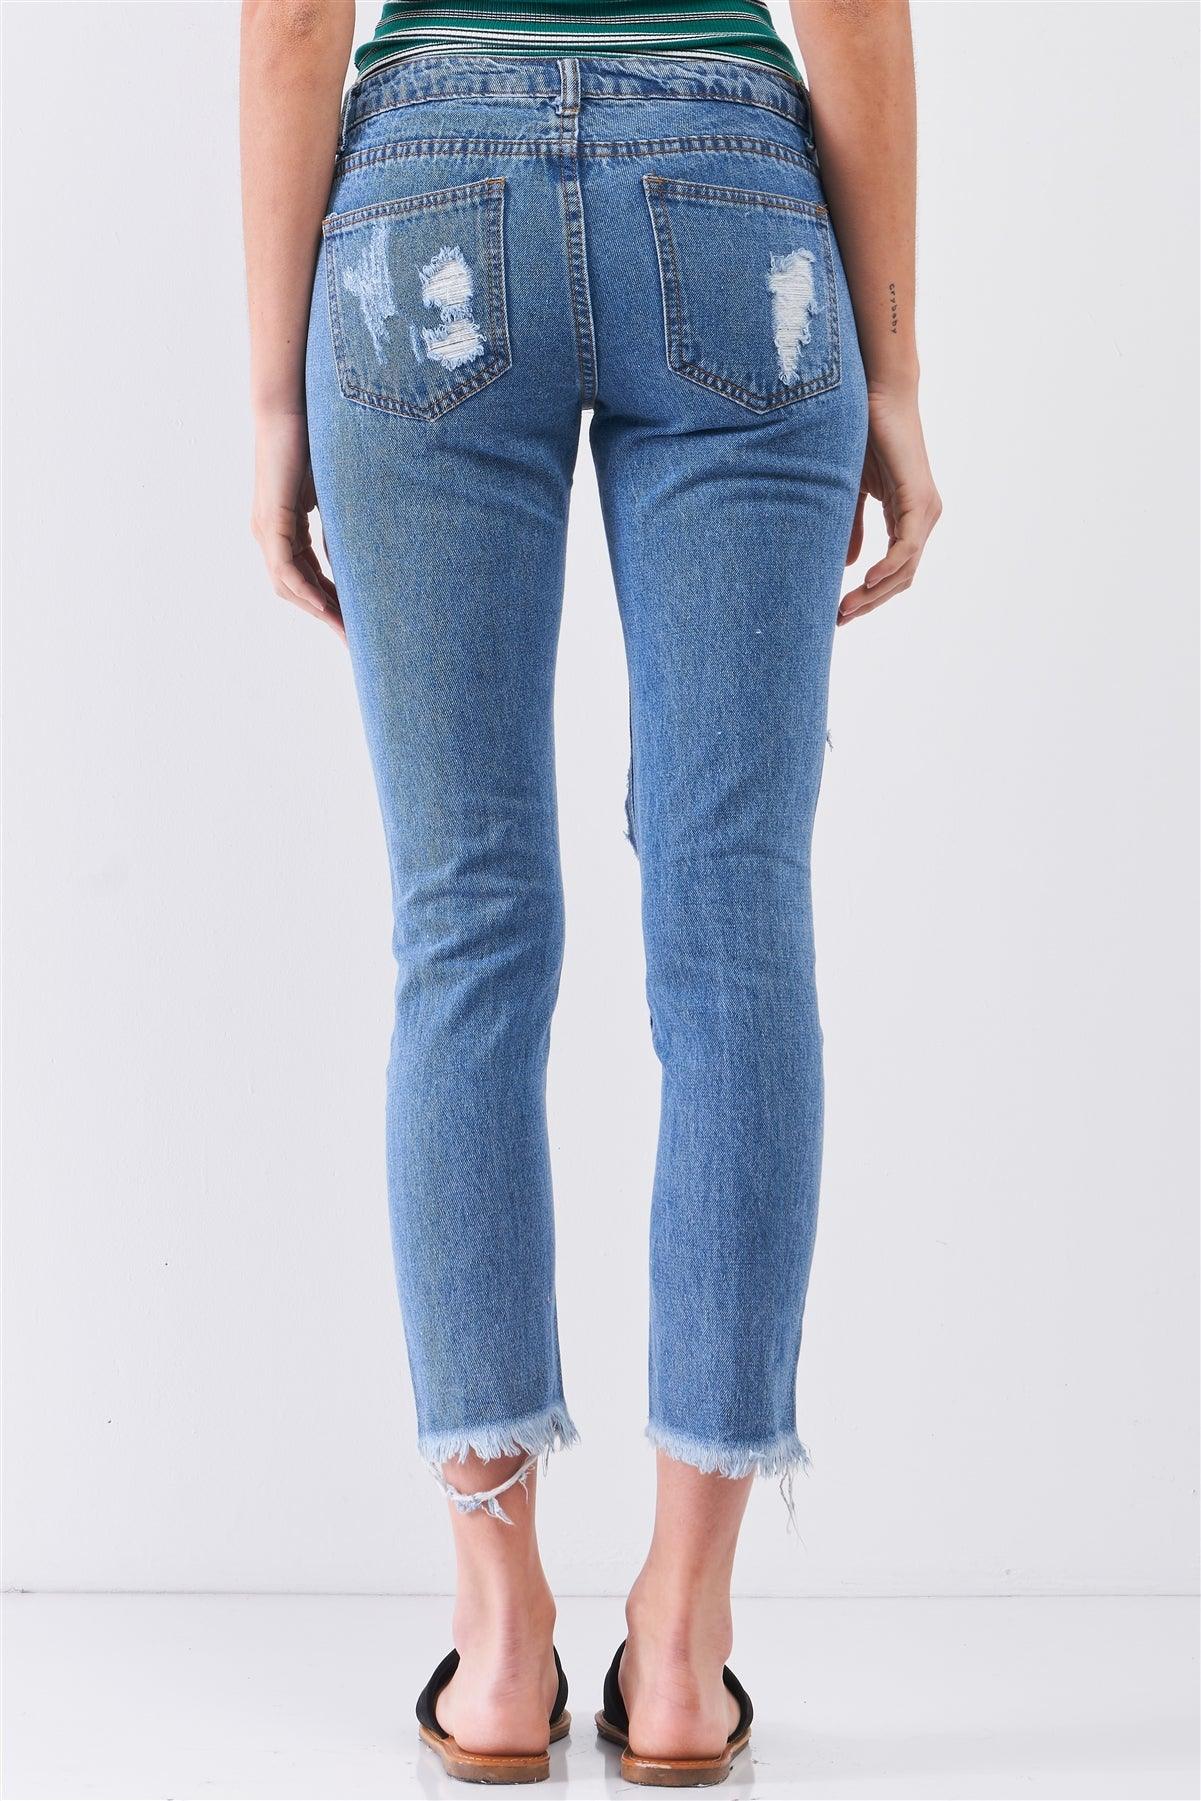 Medium Blue Ripped Destroyed Low-Mid Rise Denim Jeans